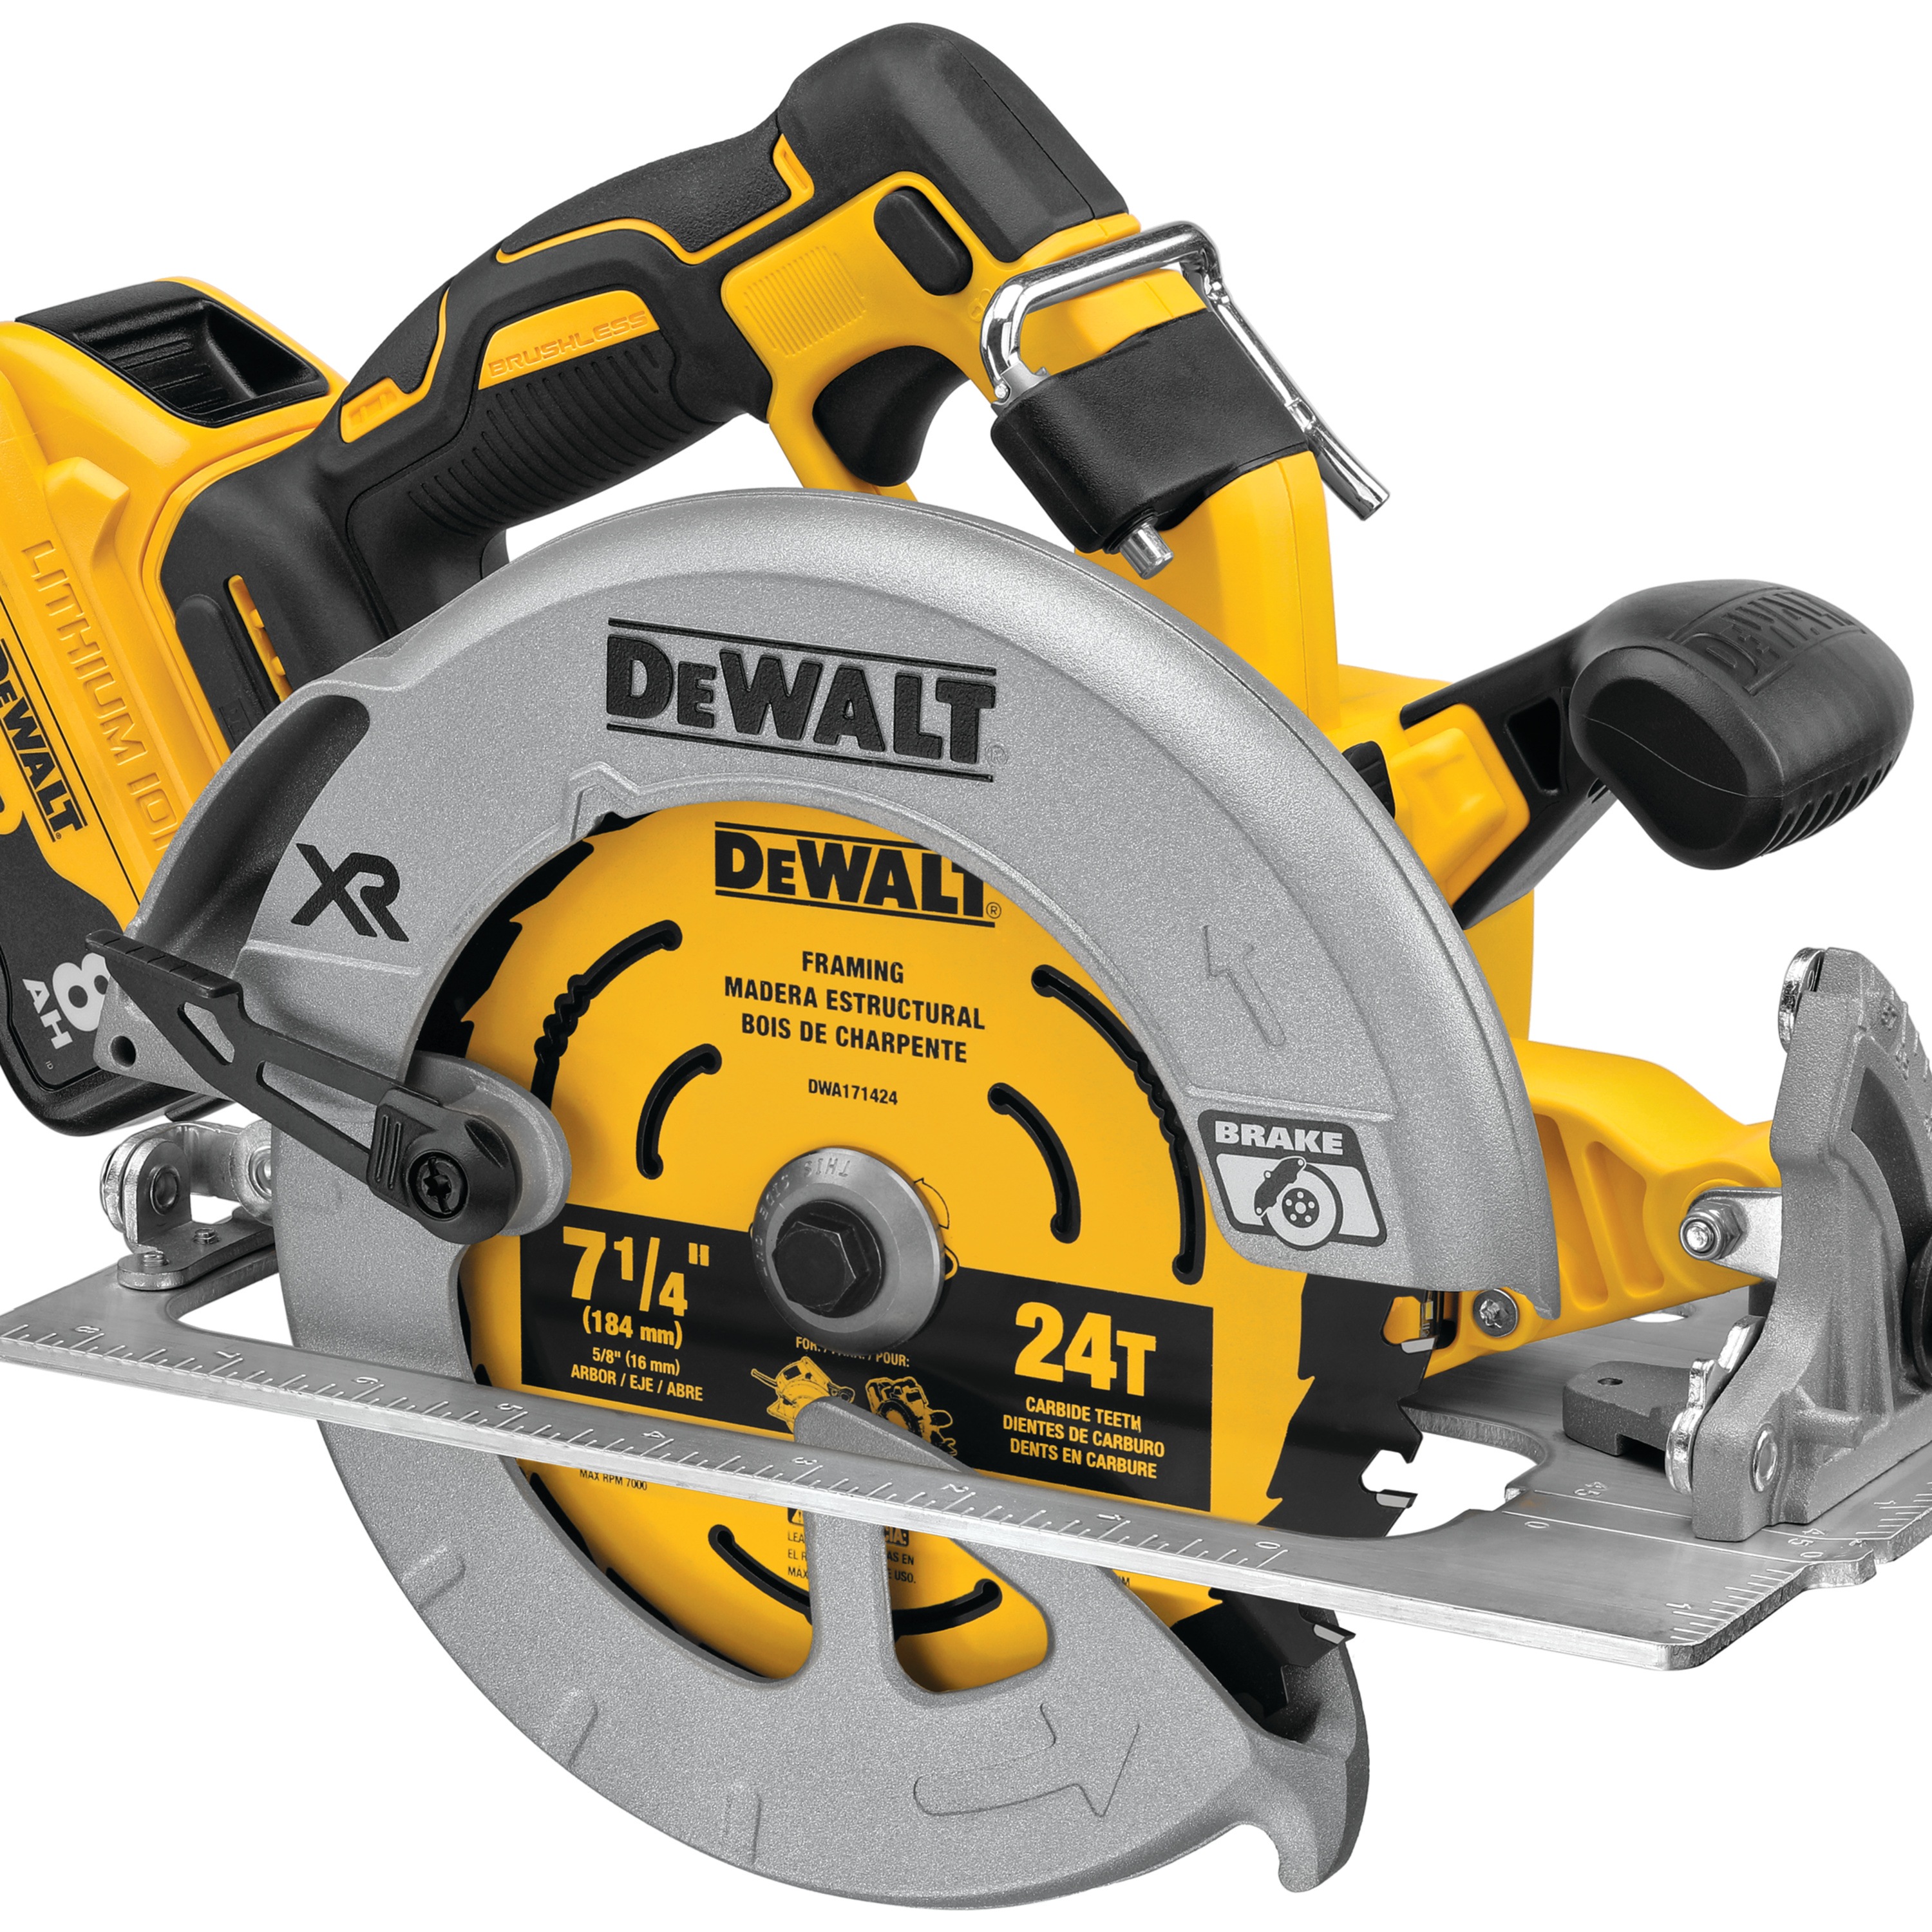 Profile of XR brushless circular saw with POWER DETECT tool technology.